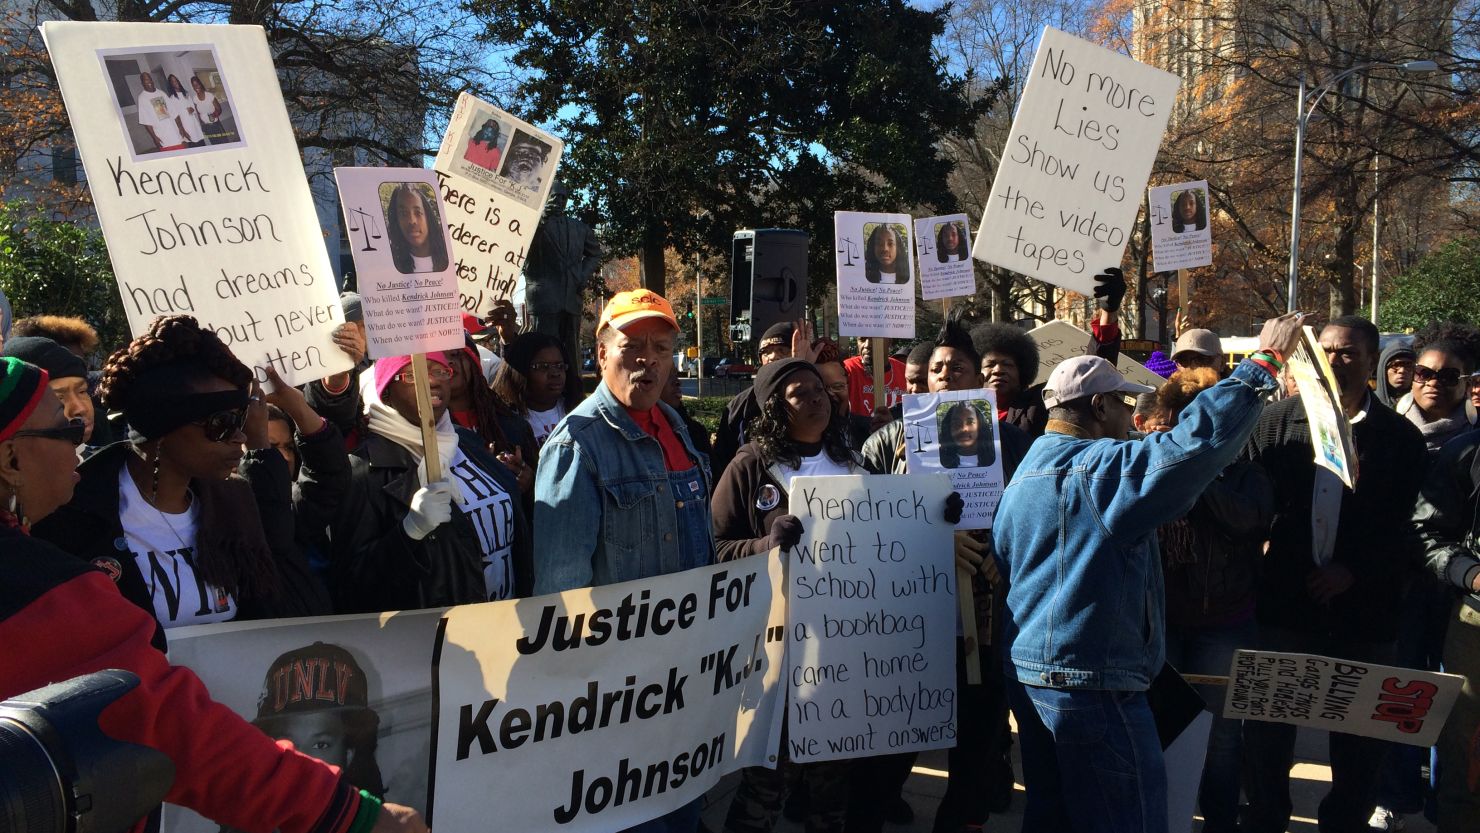 Protesters wanting an investigation of Valdosta teen Kendrick Johnson's death gathered at the state Capitol on Wednesday.